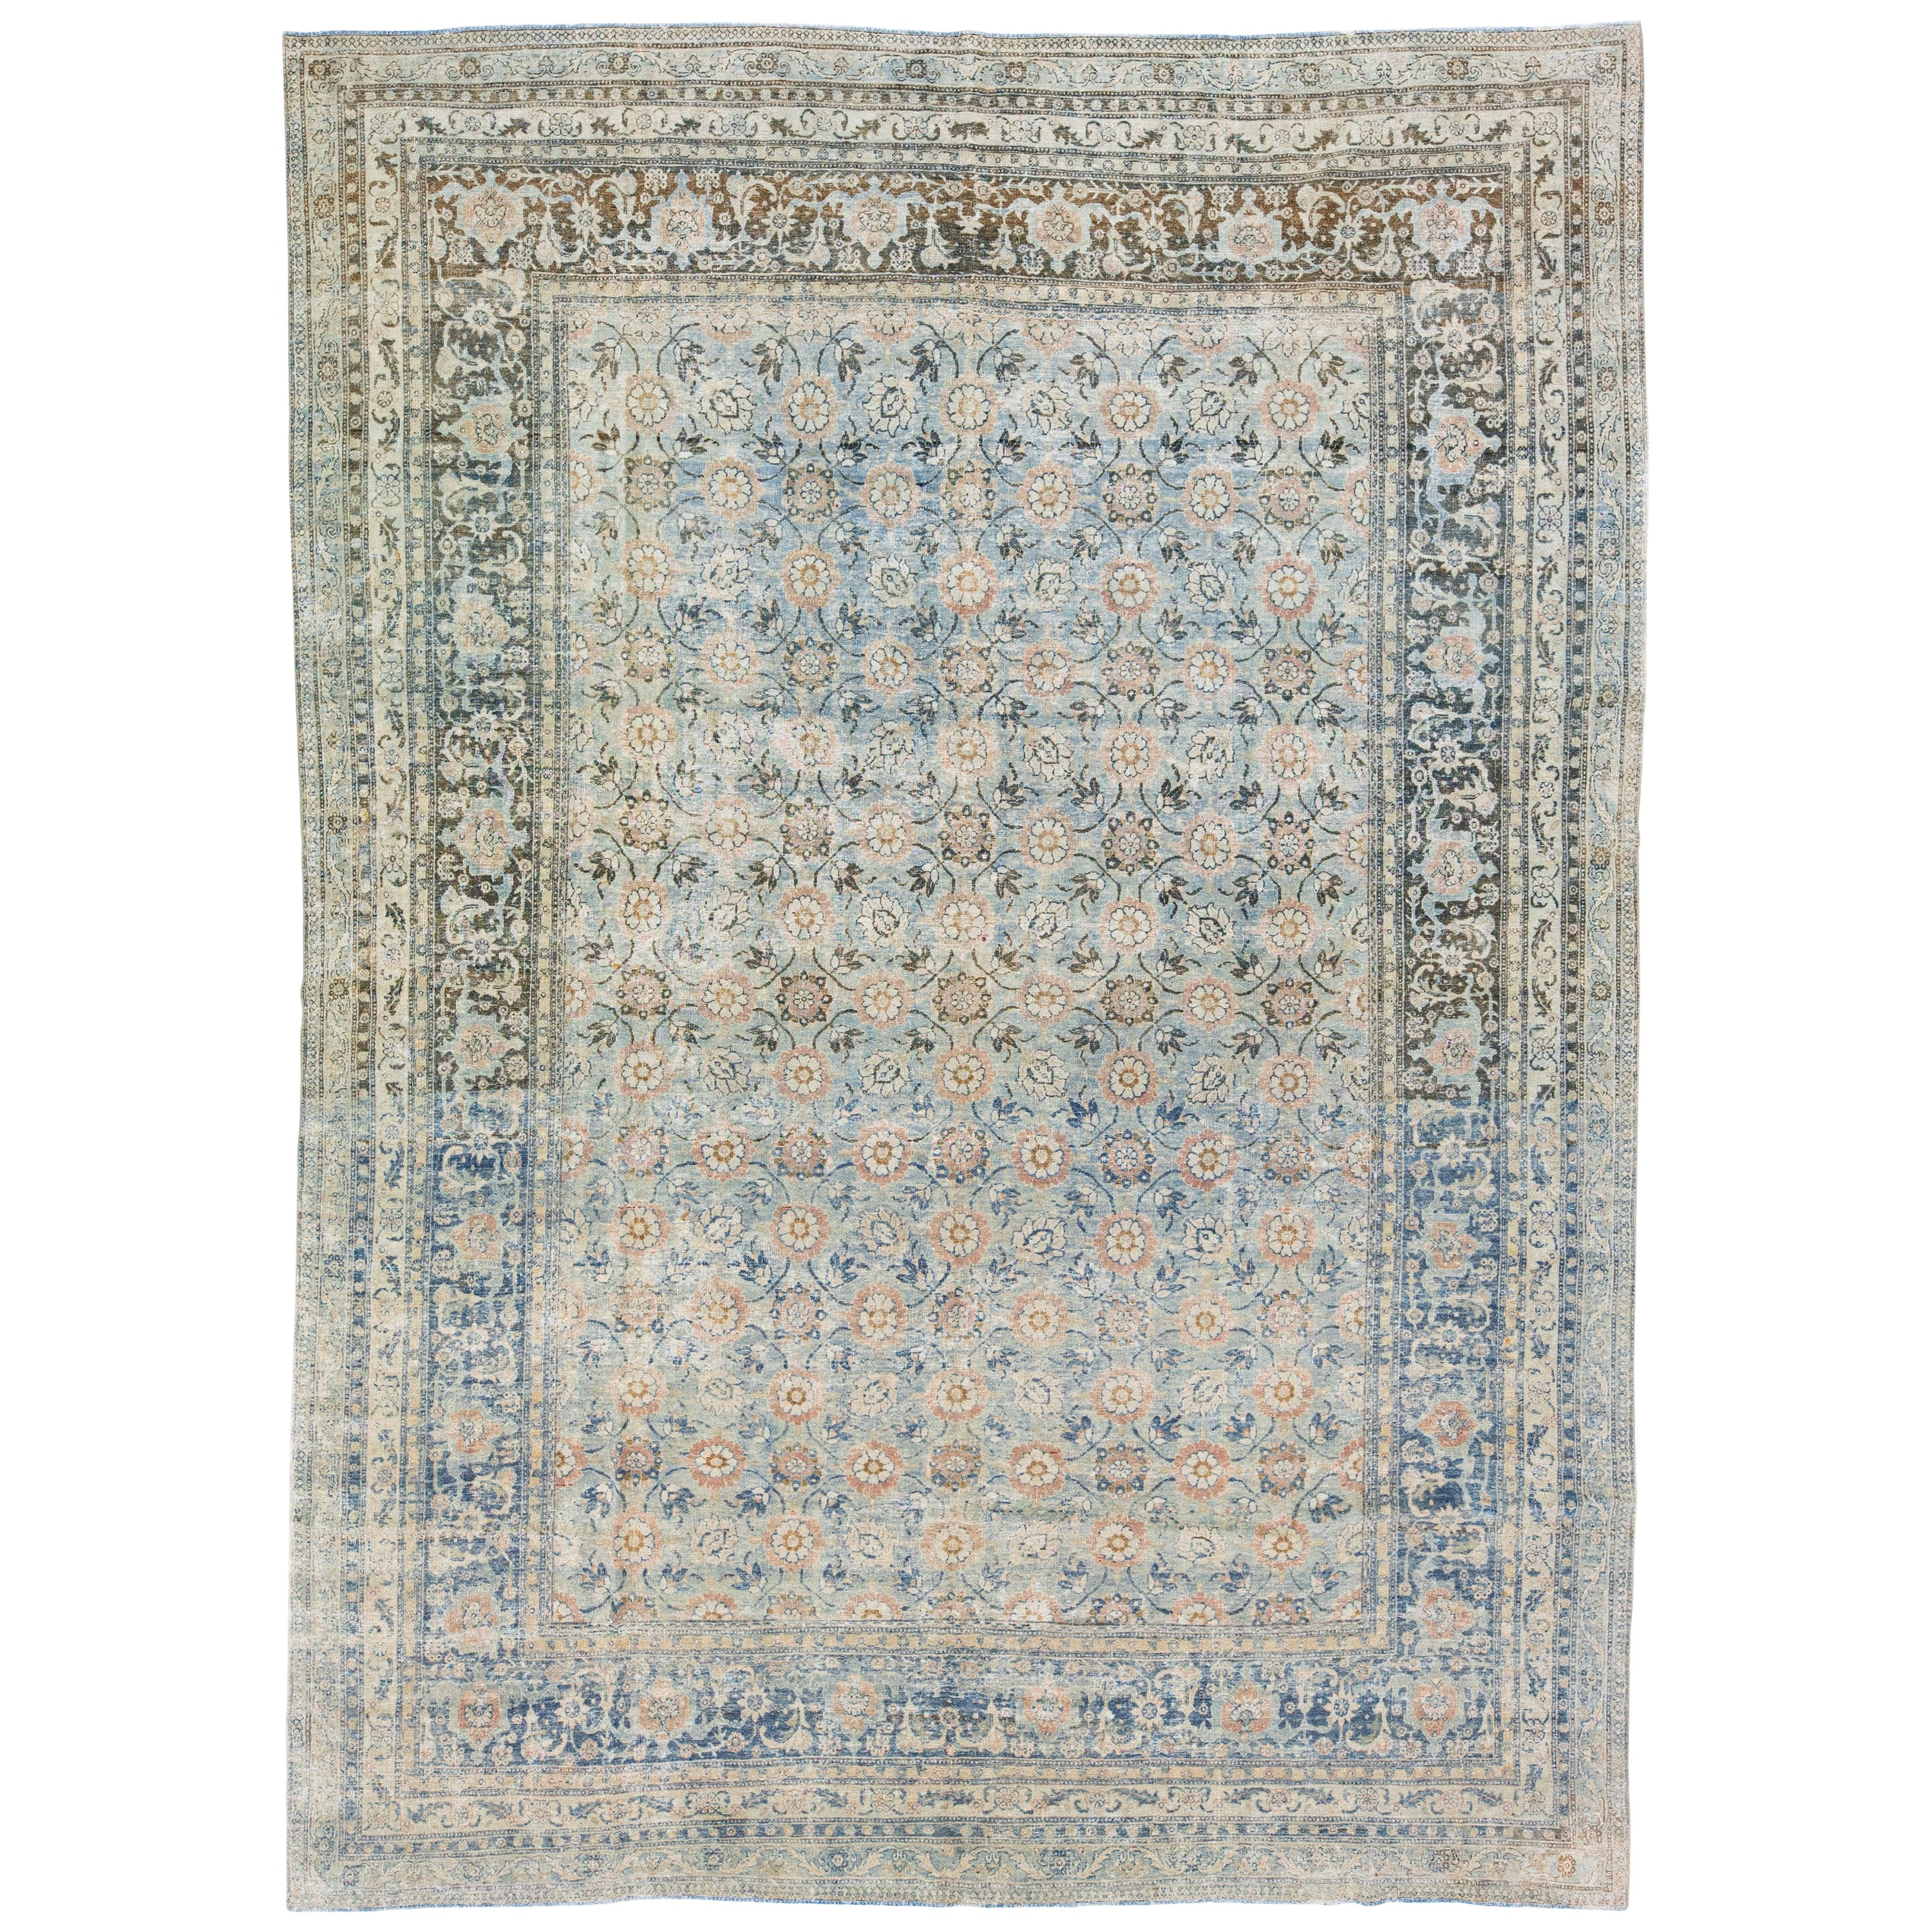 19th Century Antique Persian Tabriz Wool Rug Handmade Blue with Floral Motif For Sale